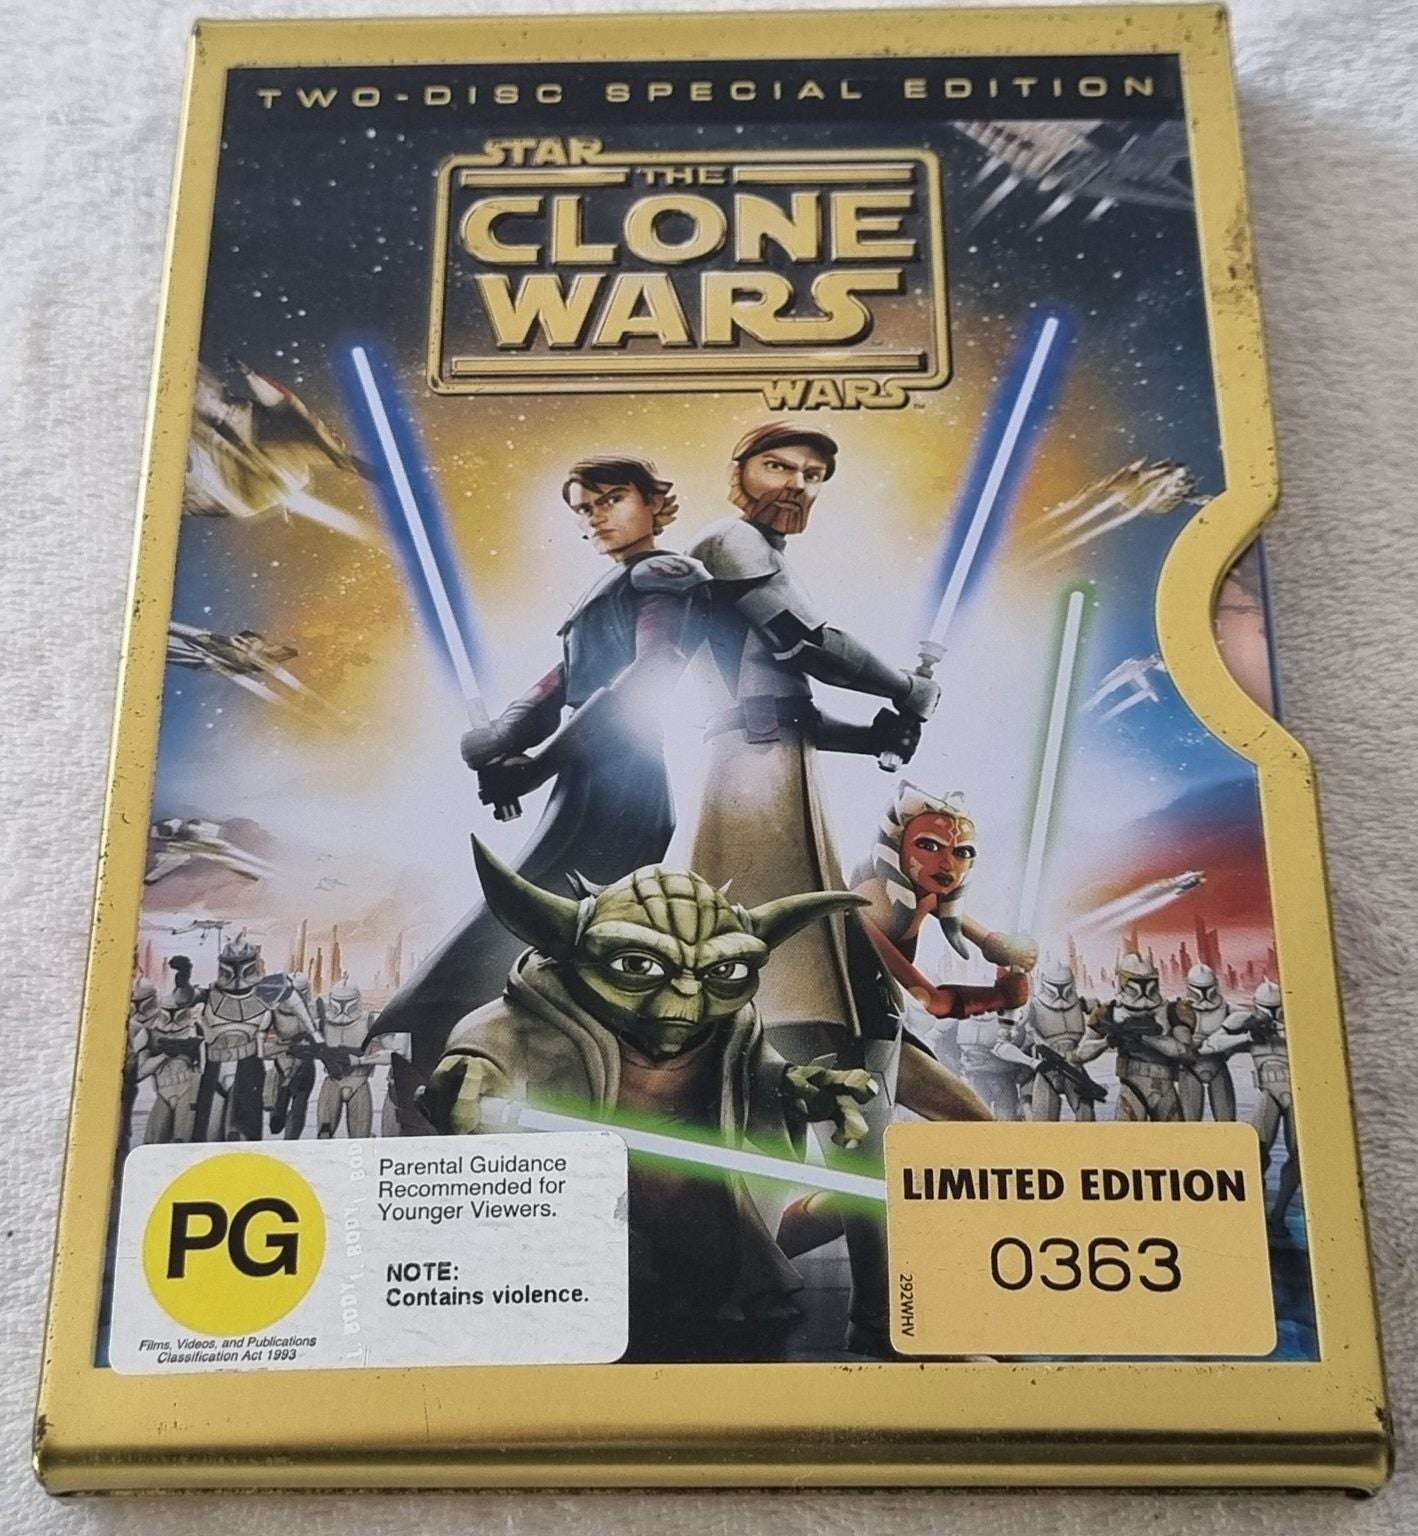 Star Wars: The Clone Wars 2 Disc Limited Edition Steel Case